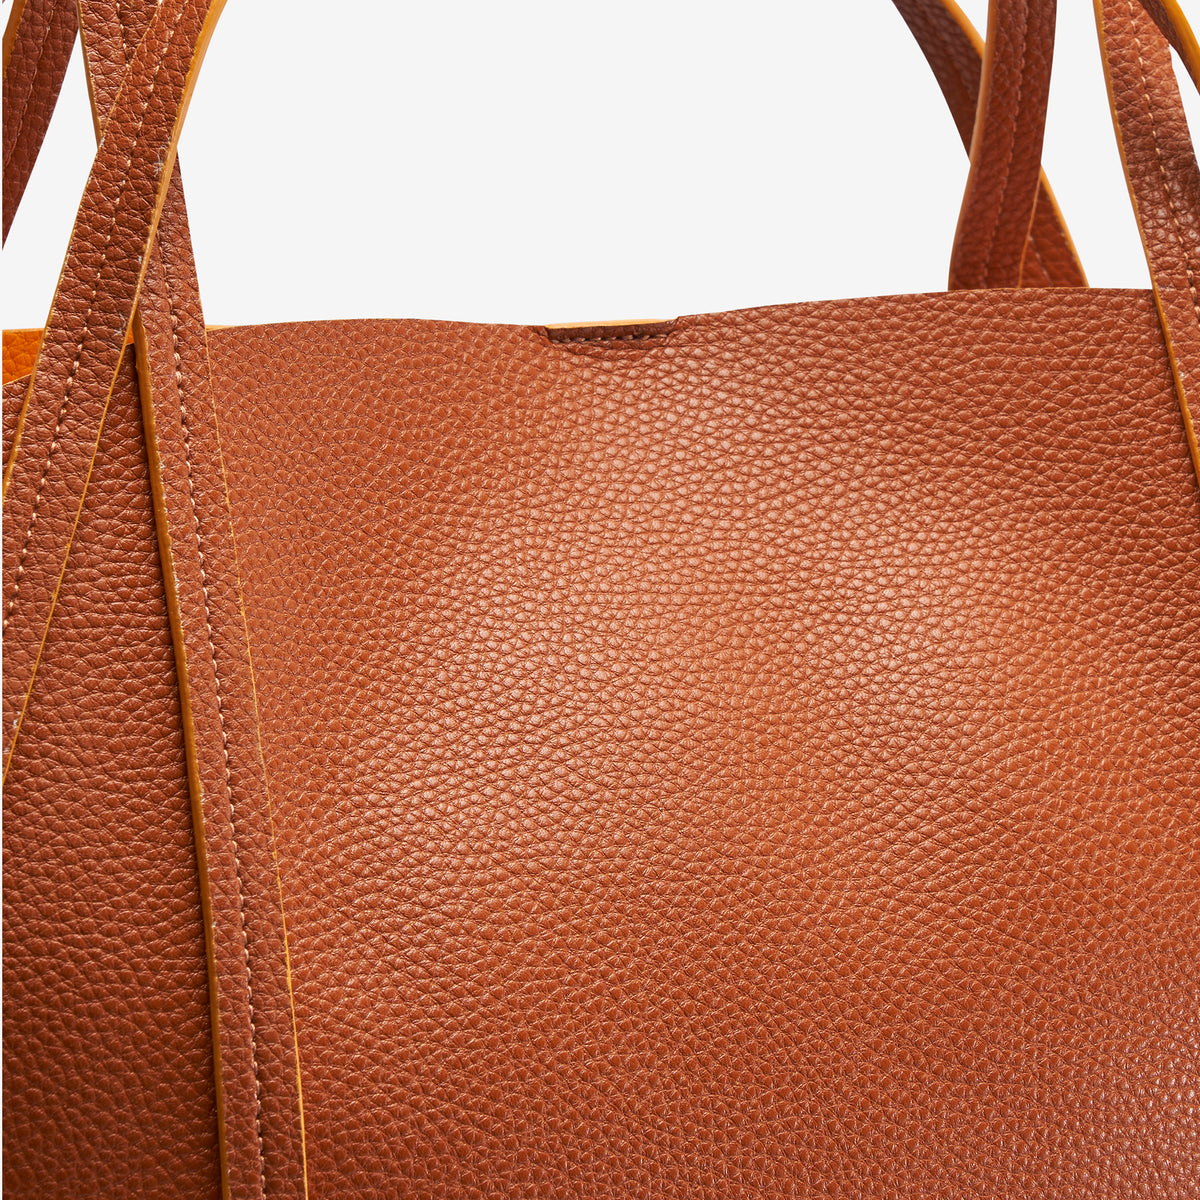     tusk-9931-recycled-sustainable-leather-tote-tan-detail-1